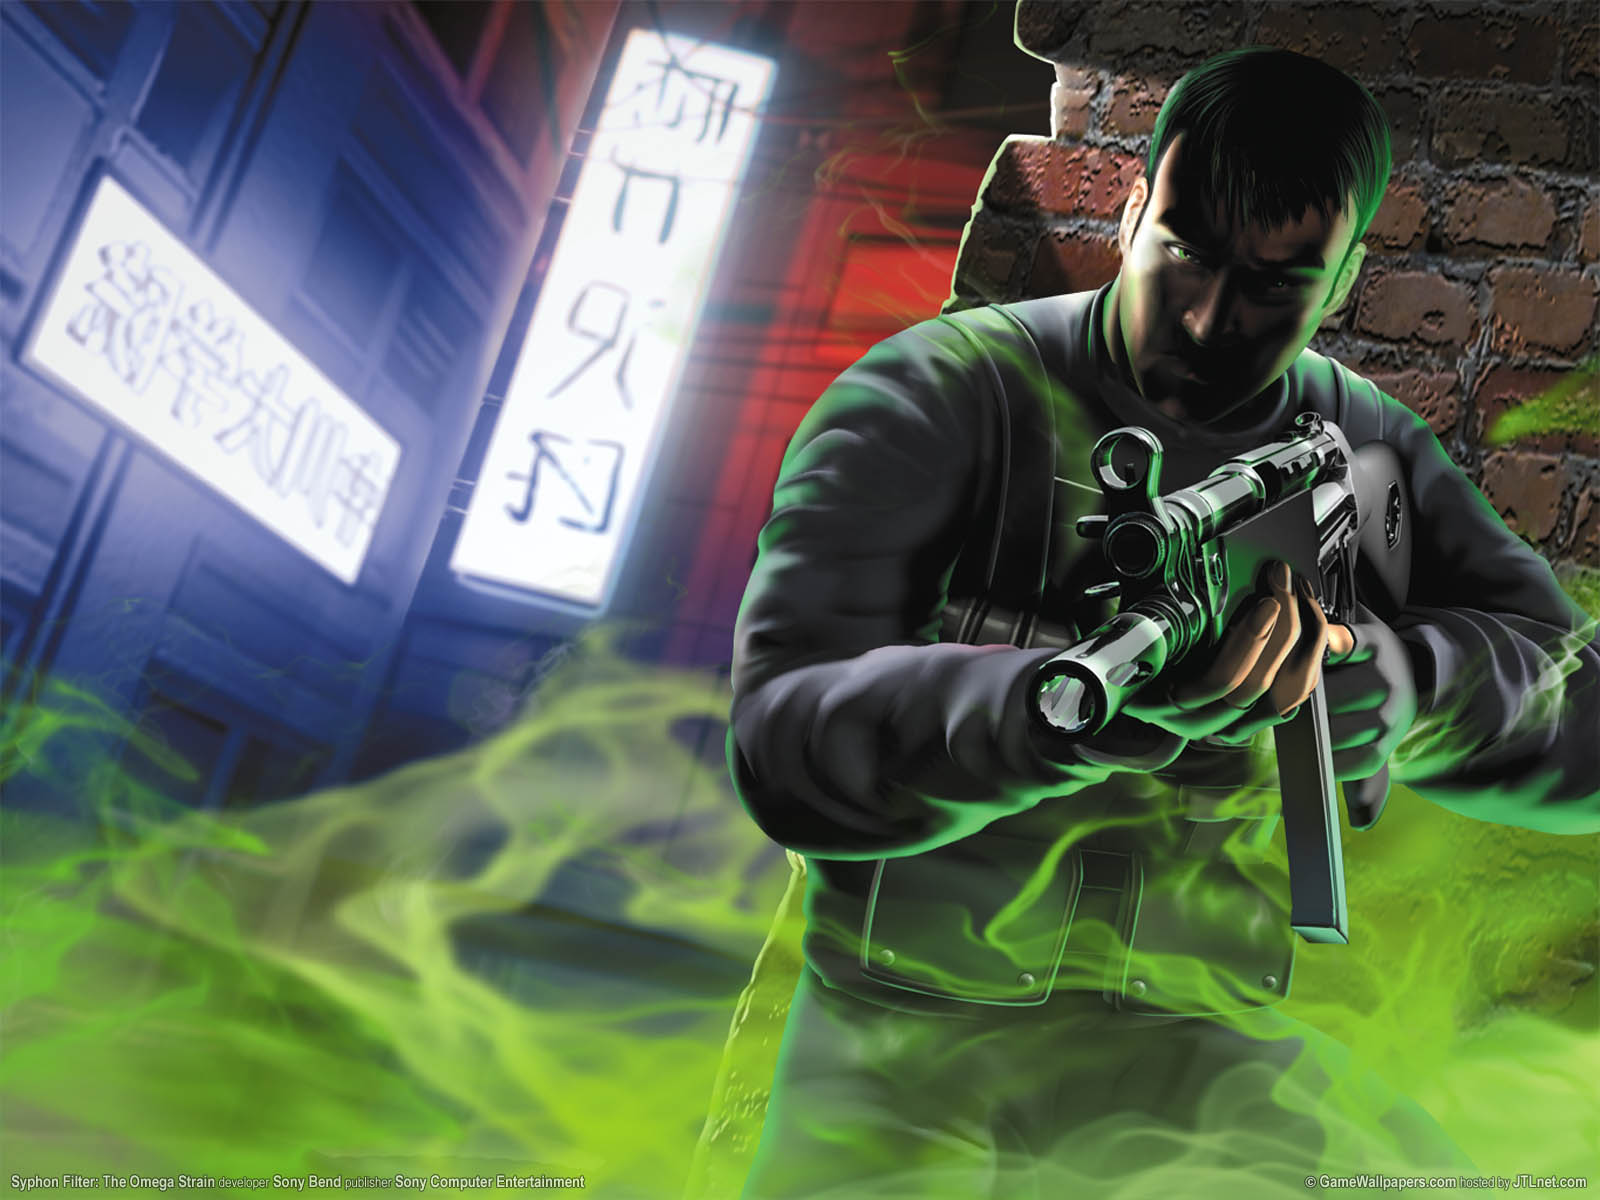 Syphon Filter: The Omega Strain screenshots, images and pictures